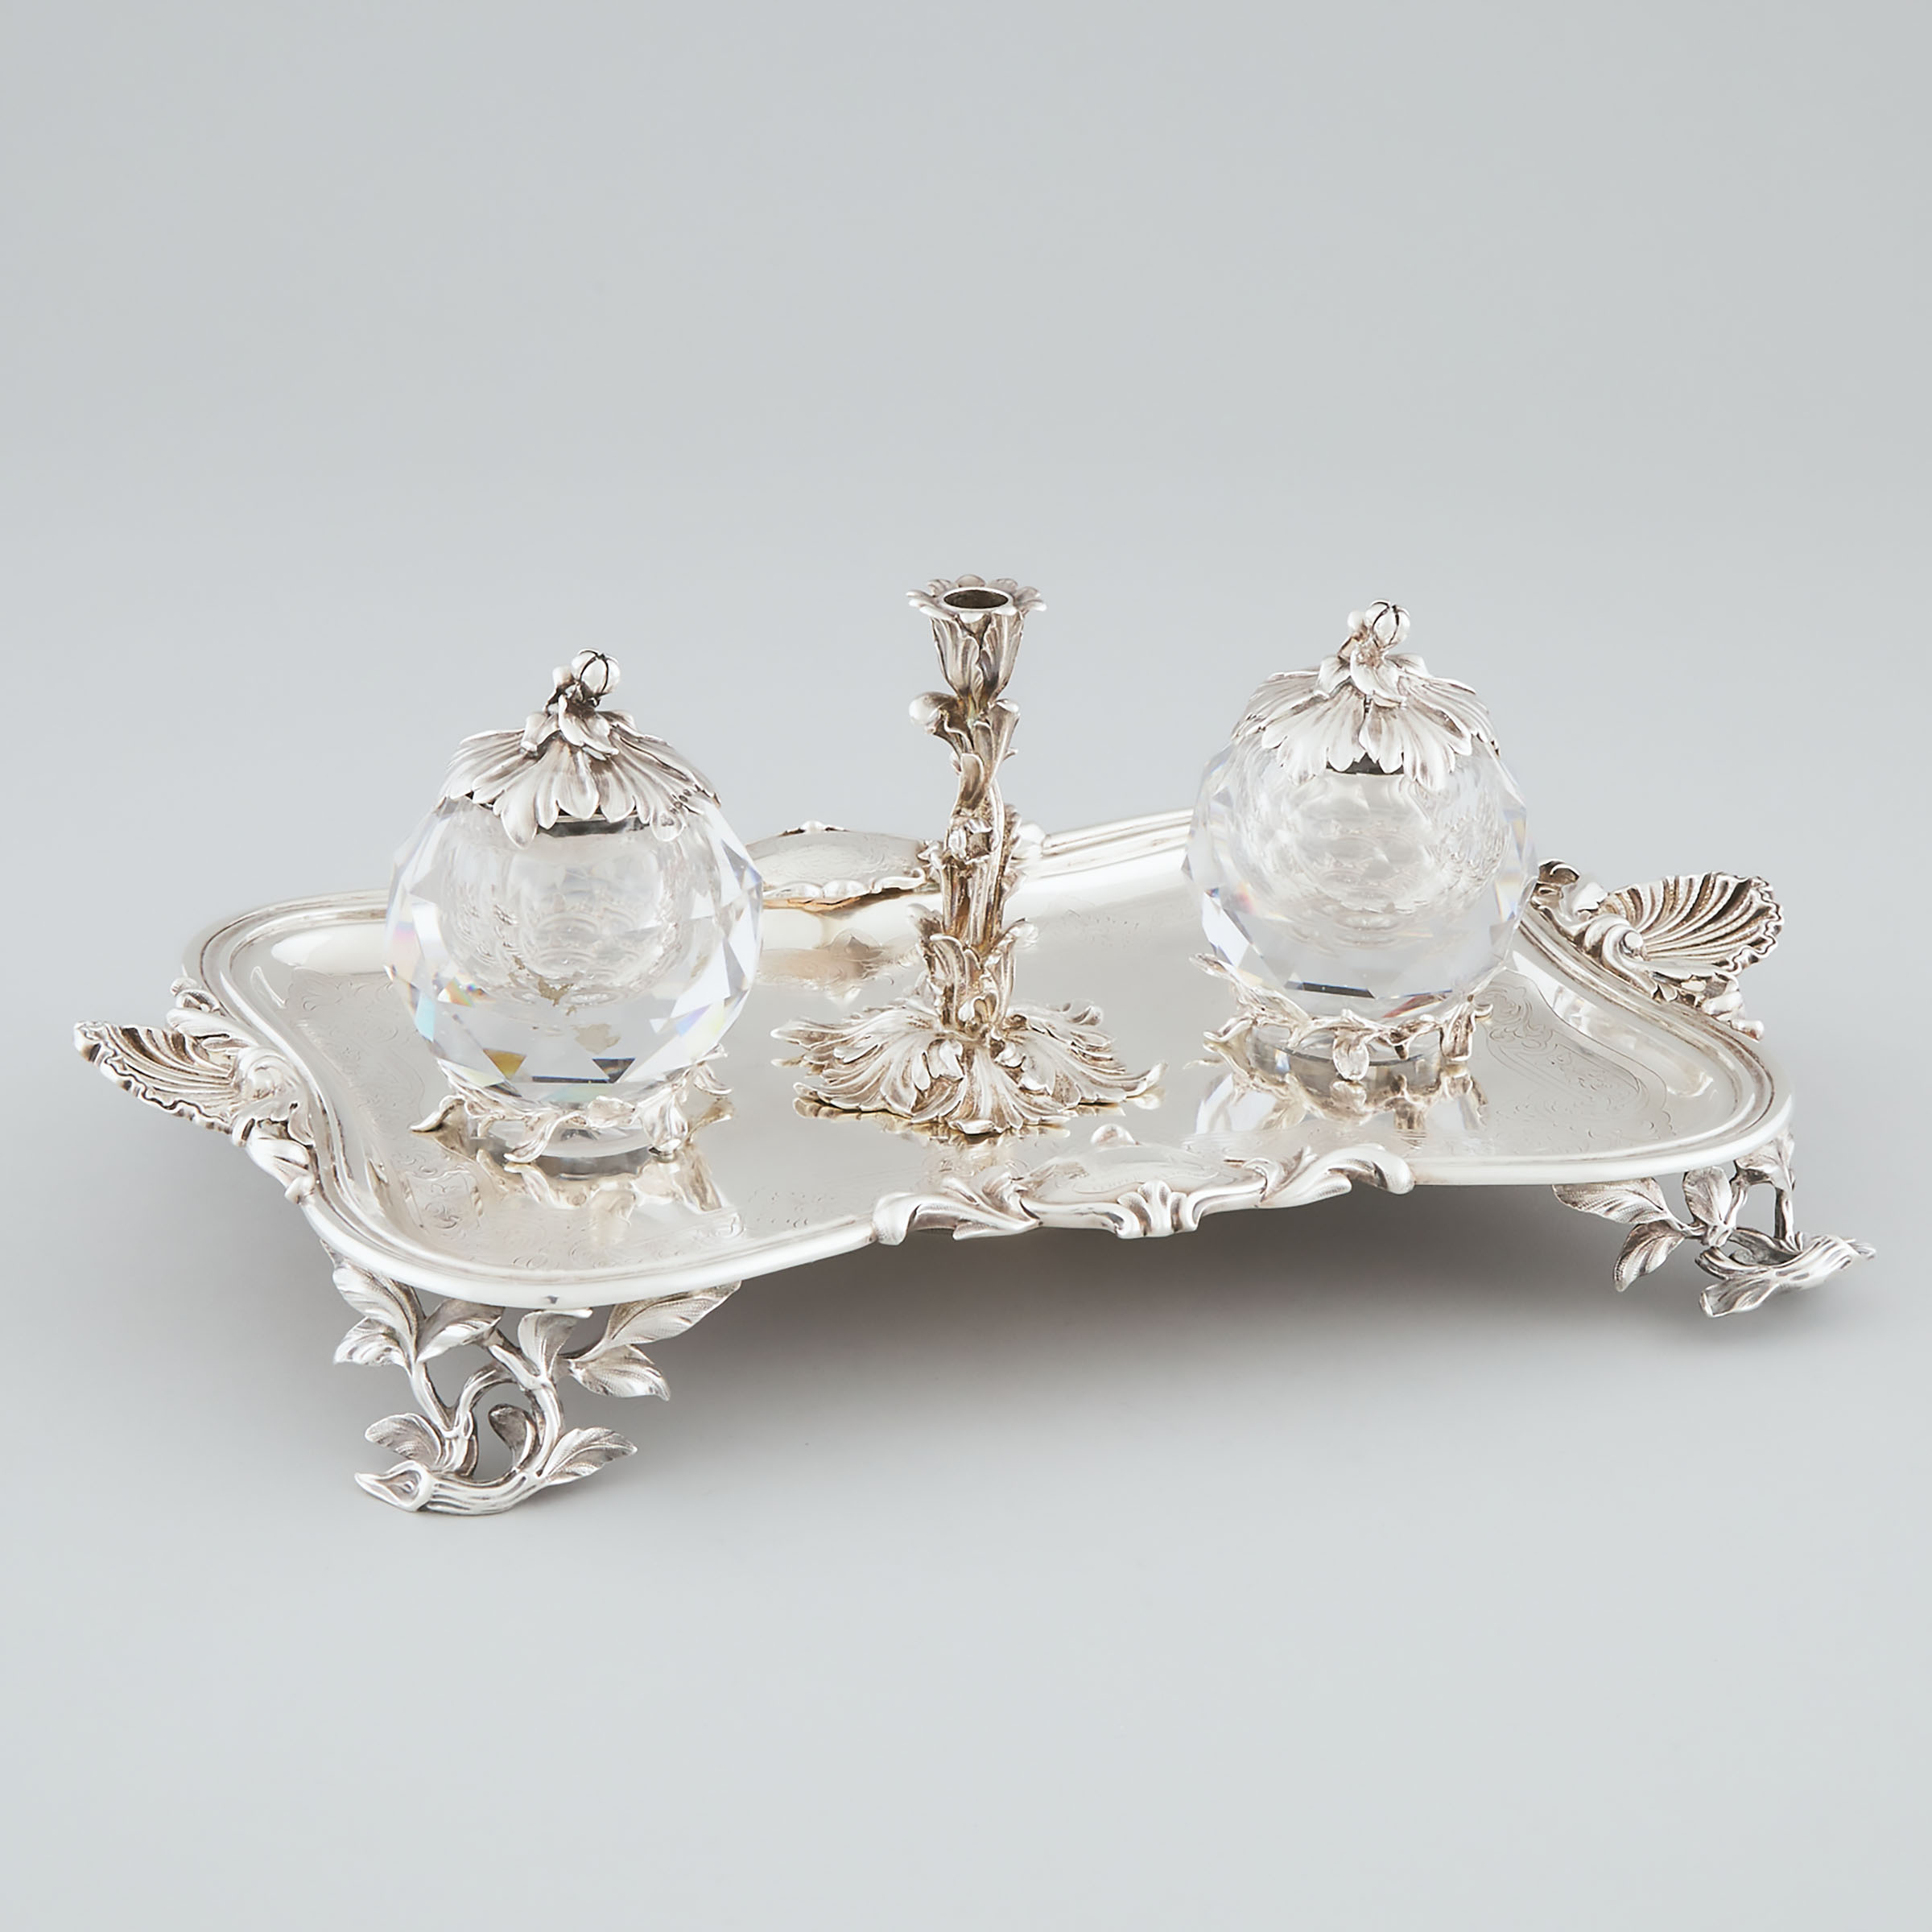 Victorian Silver and Cut Glass